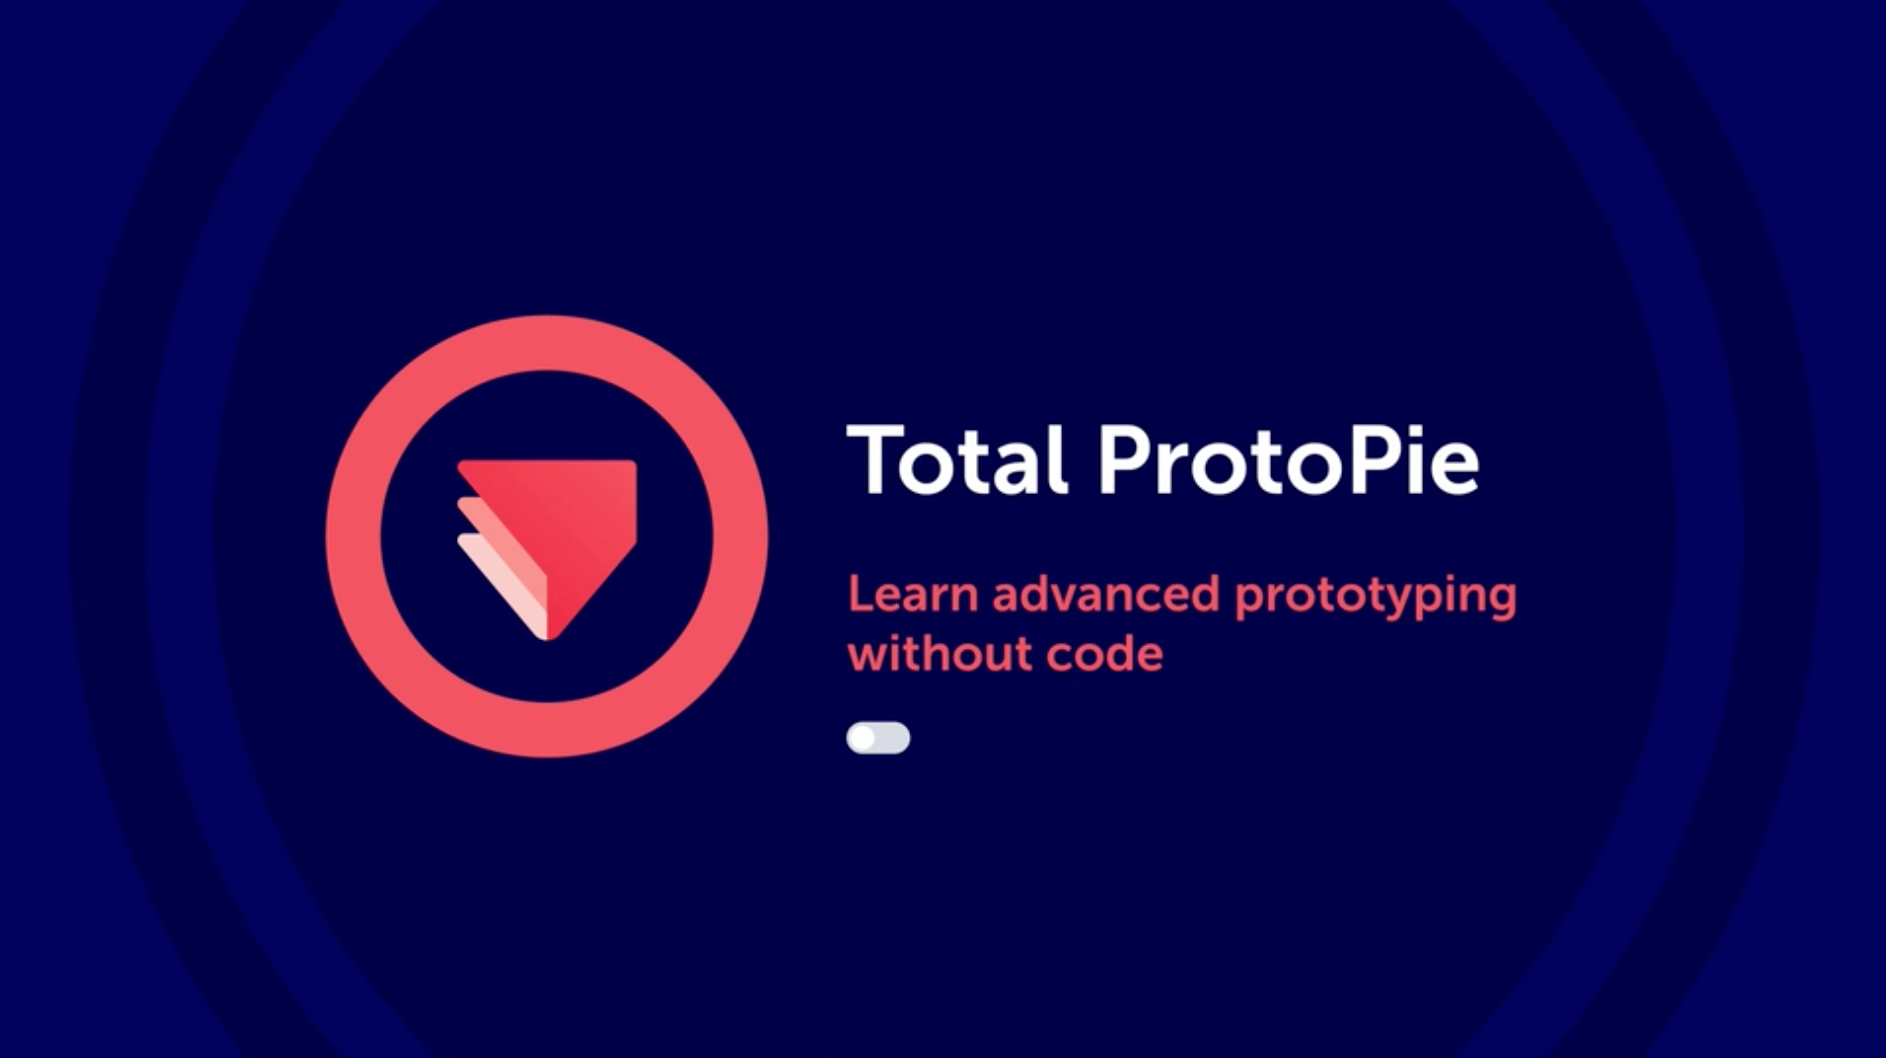 Total ProtoPie: learn advanced prototyping without code.